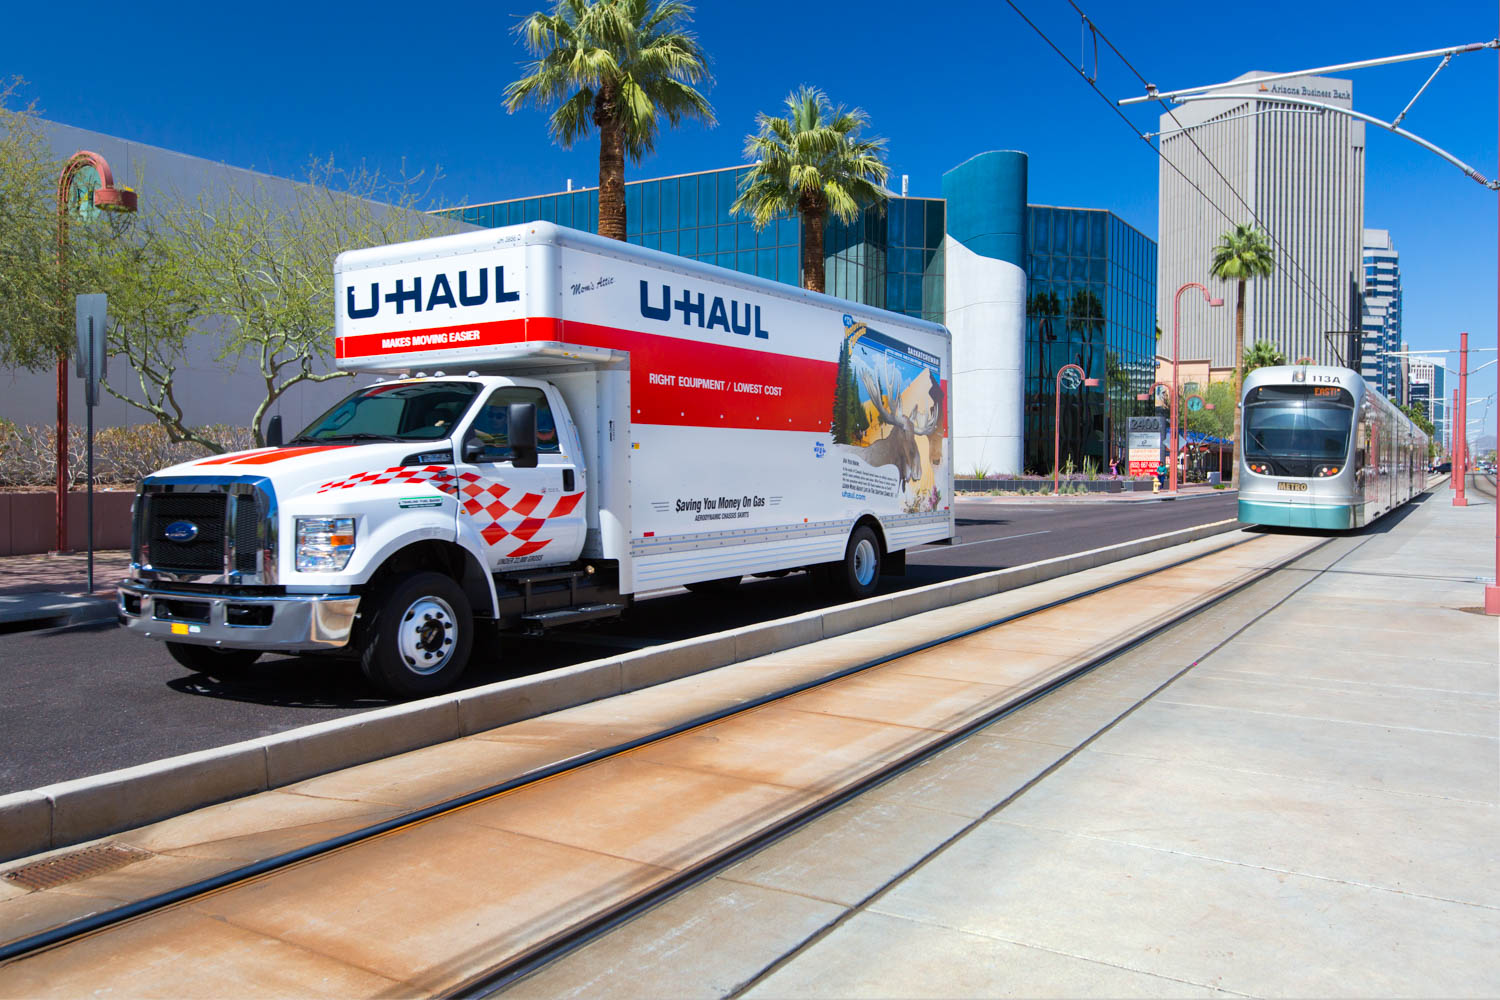 2020 Migration Trends: ARIZONA is the U-Haul No. 5 Growth State